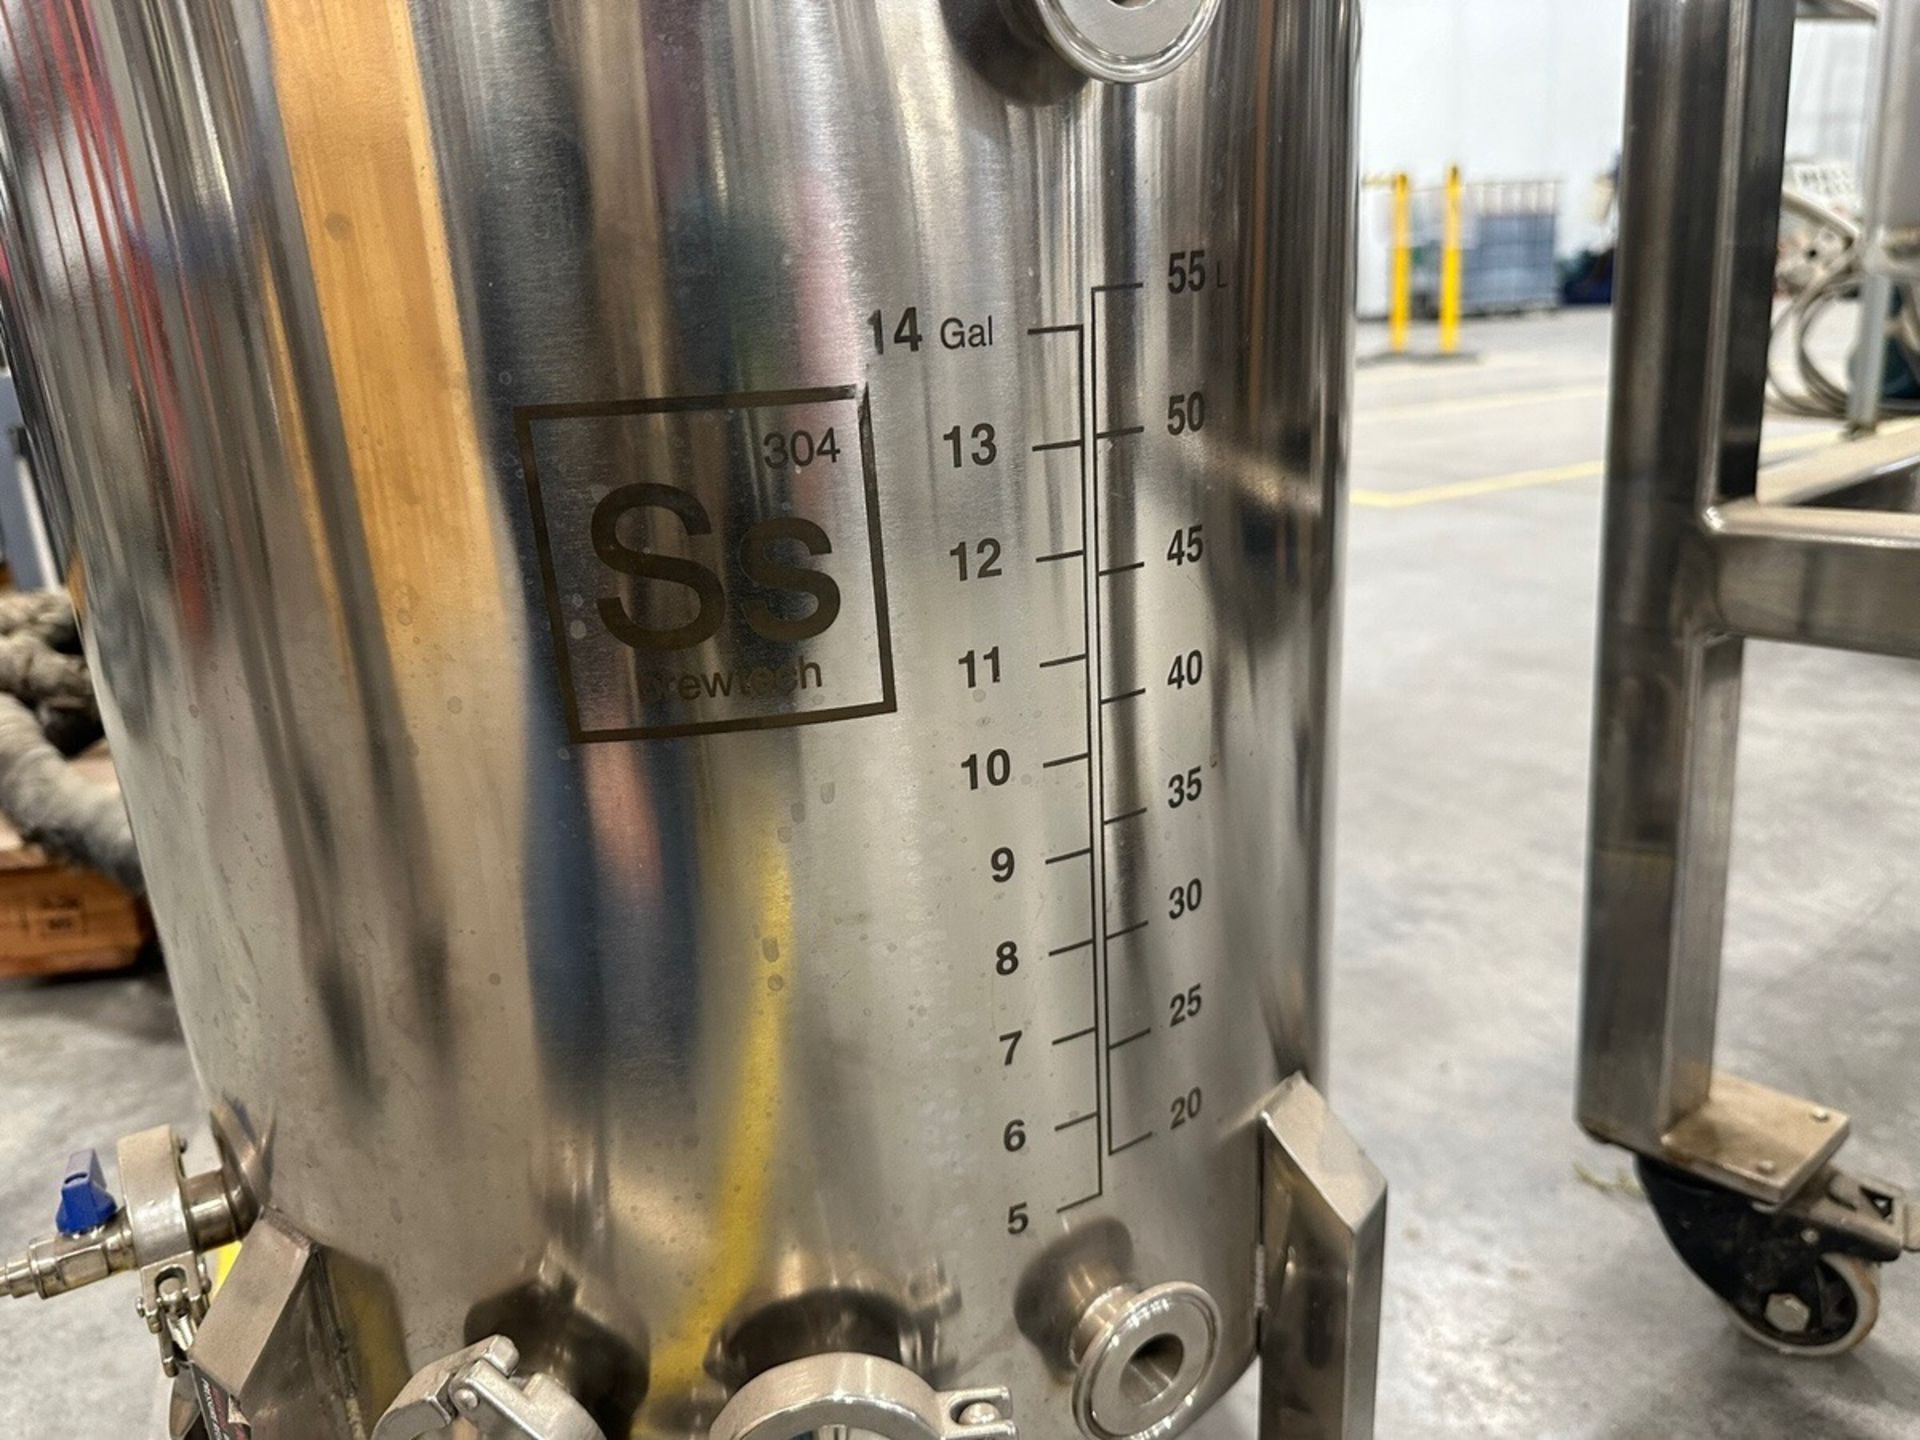 Brew Tech Stainless Steel Vessel | Rig Fee $75 - Image 3 of 5